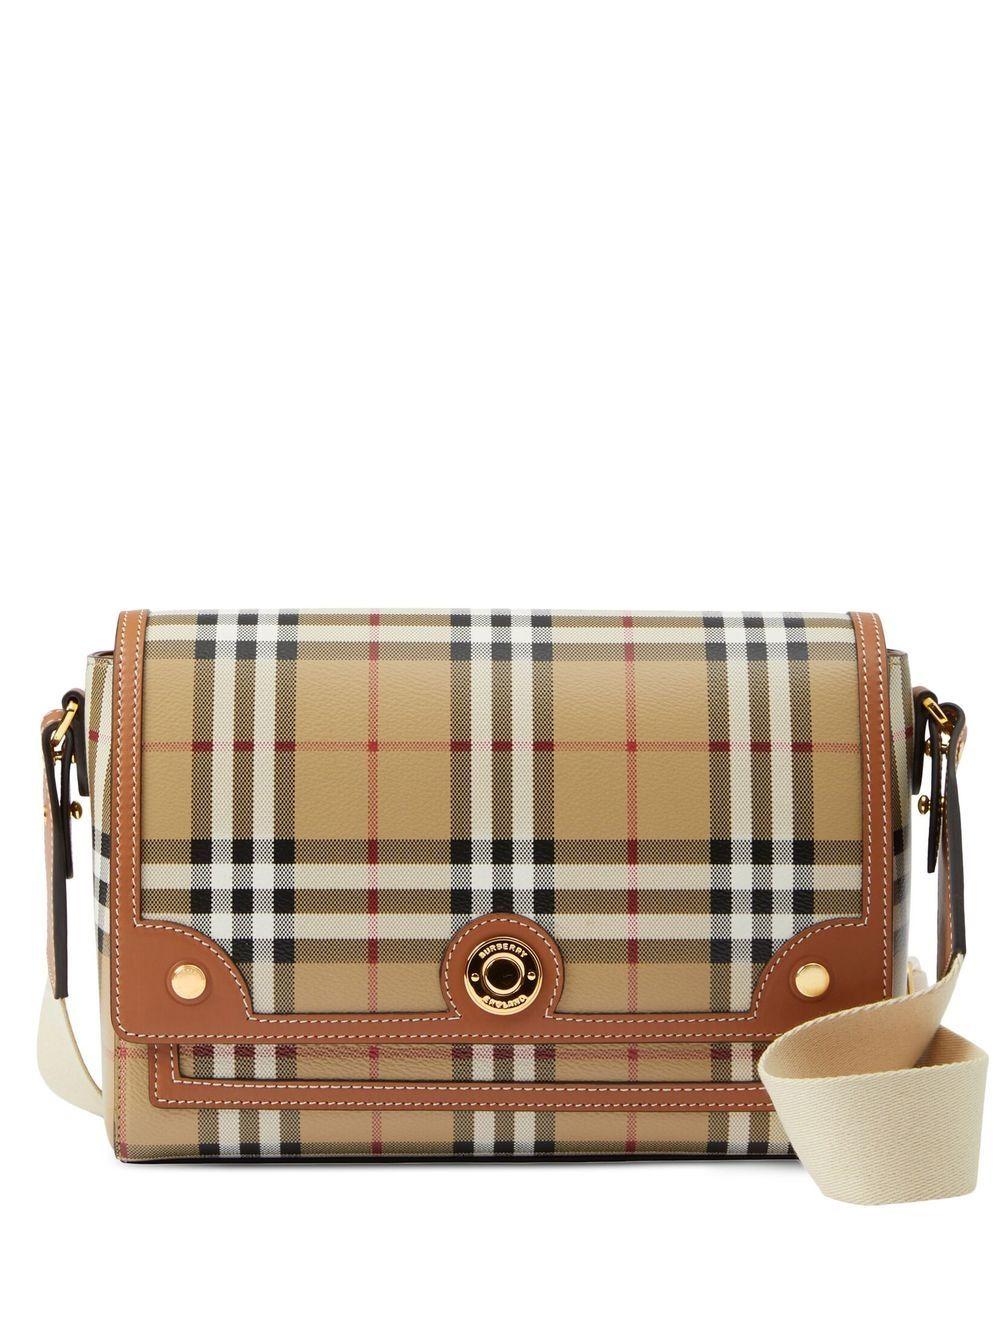 Burberry Note Check Crossbody Bag in Brown | Lyst